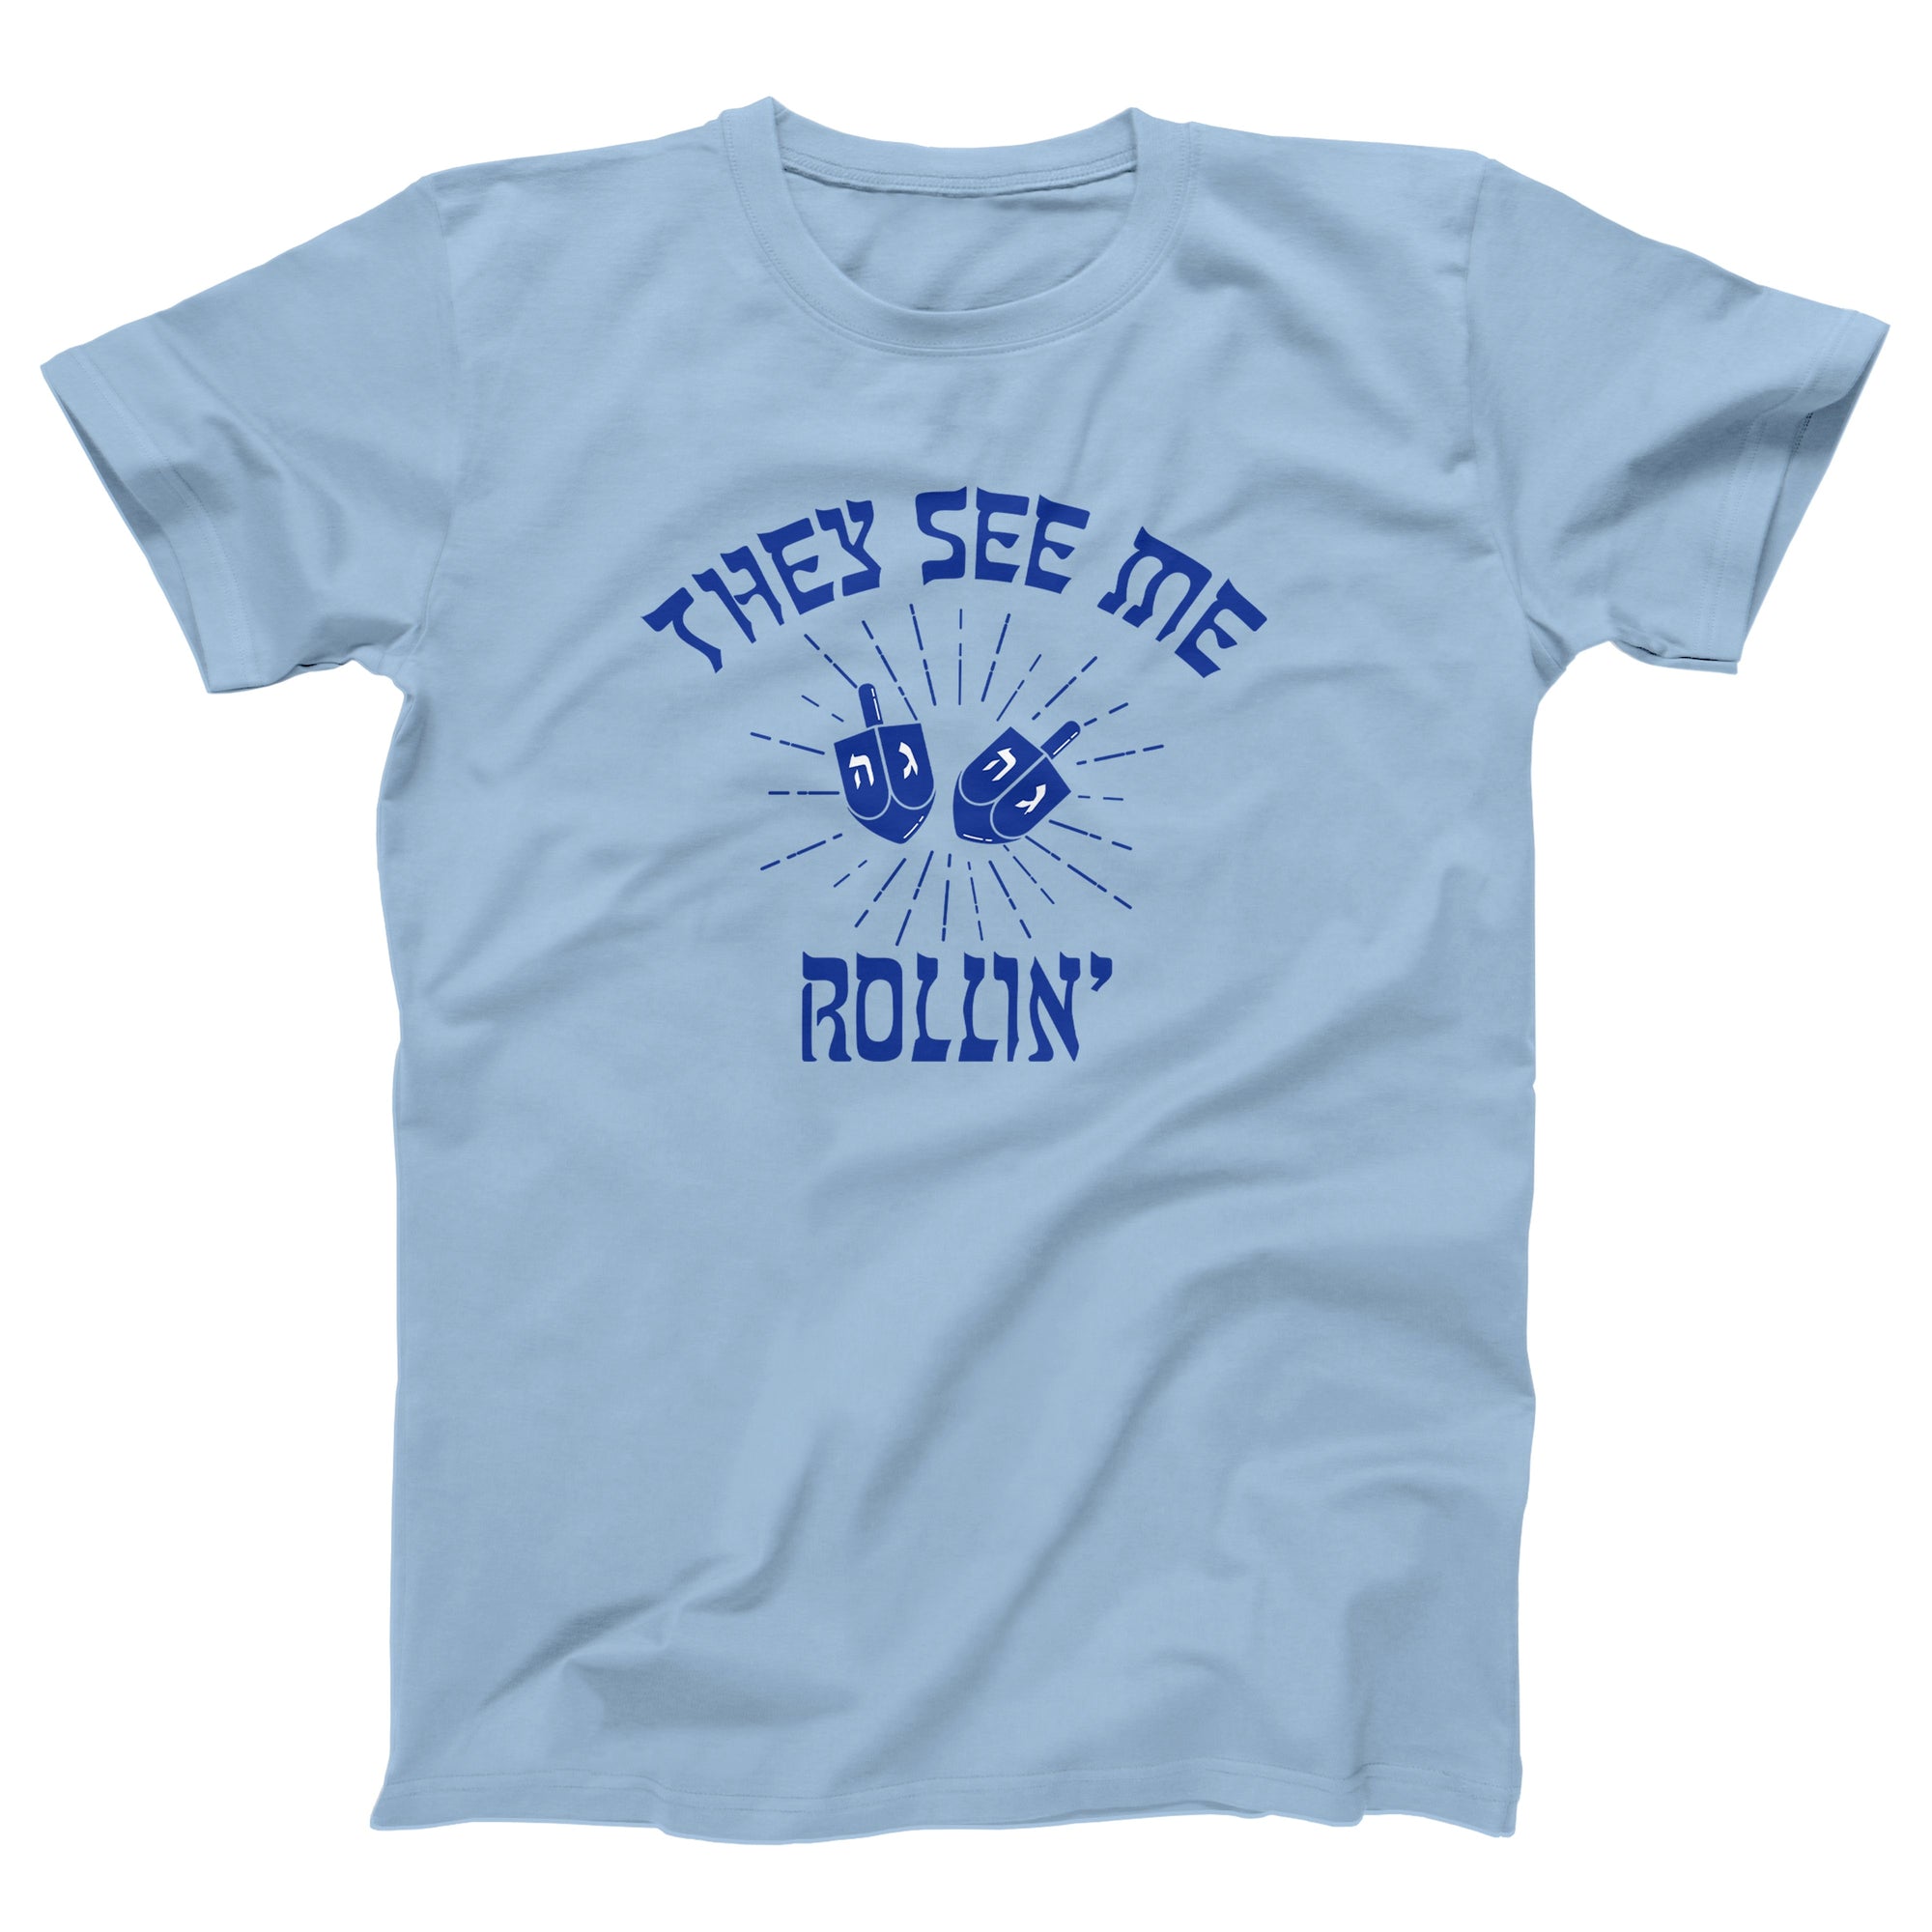 They See Me Rollin' Adult Unisex T-Shirt - anishphilip